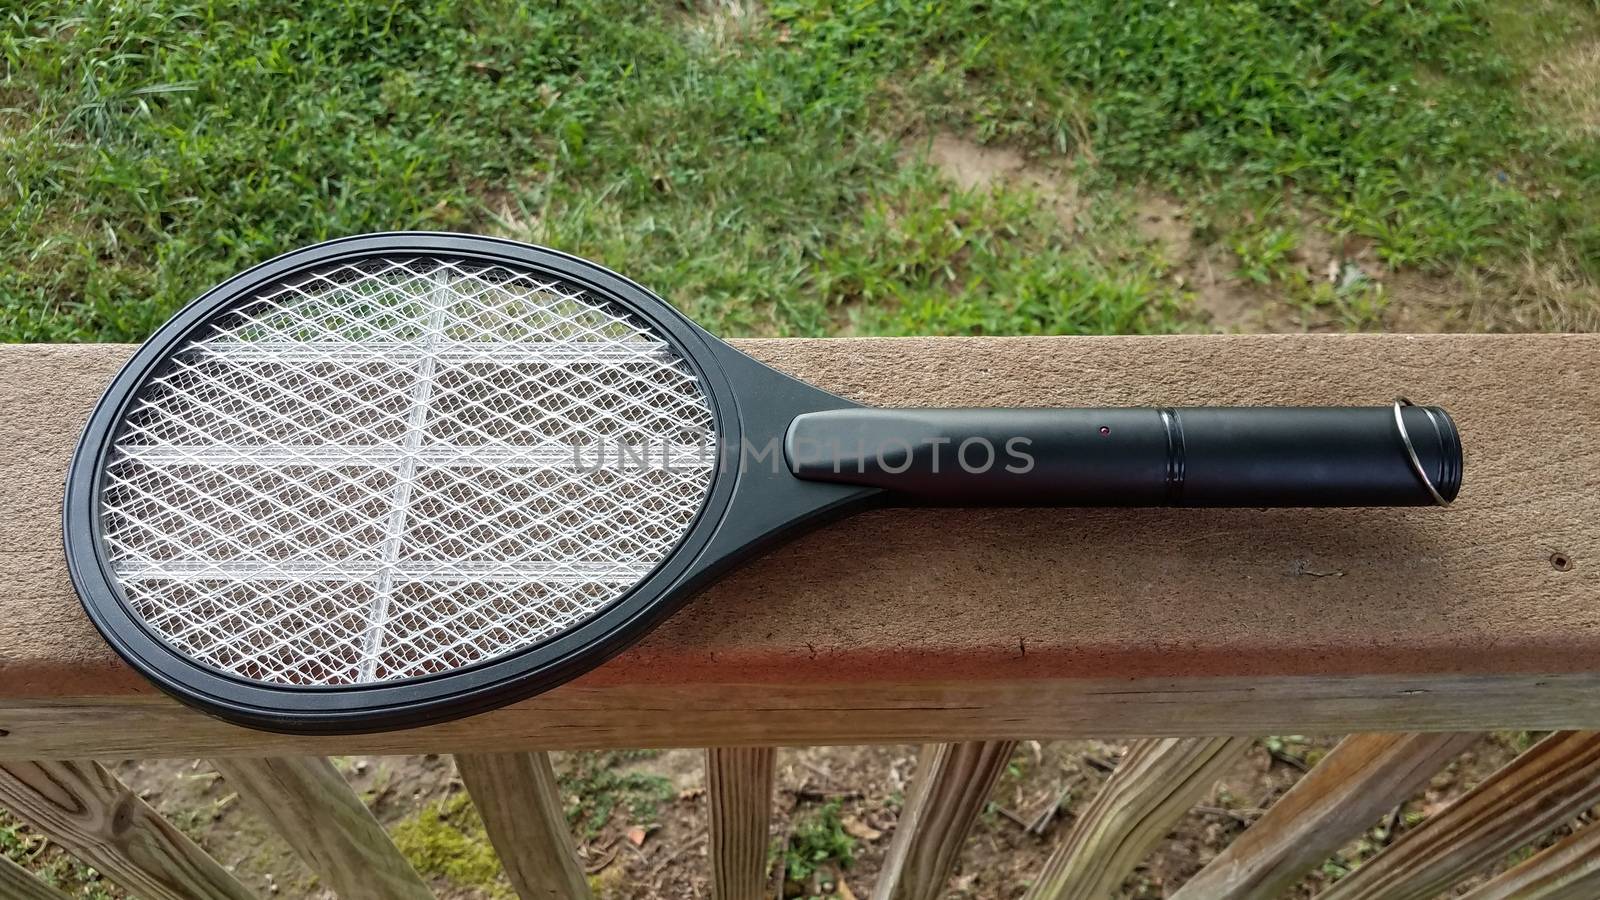 electronic metal tennis racket insect killer on wood deck railing